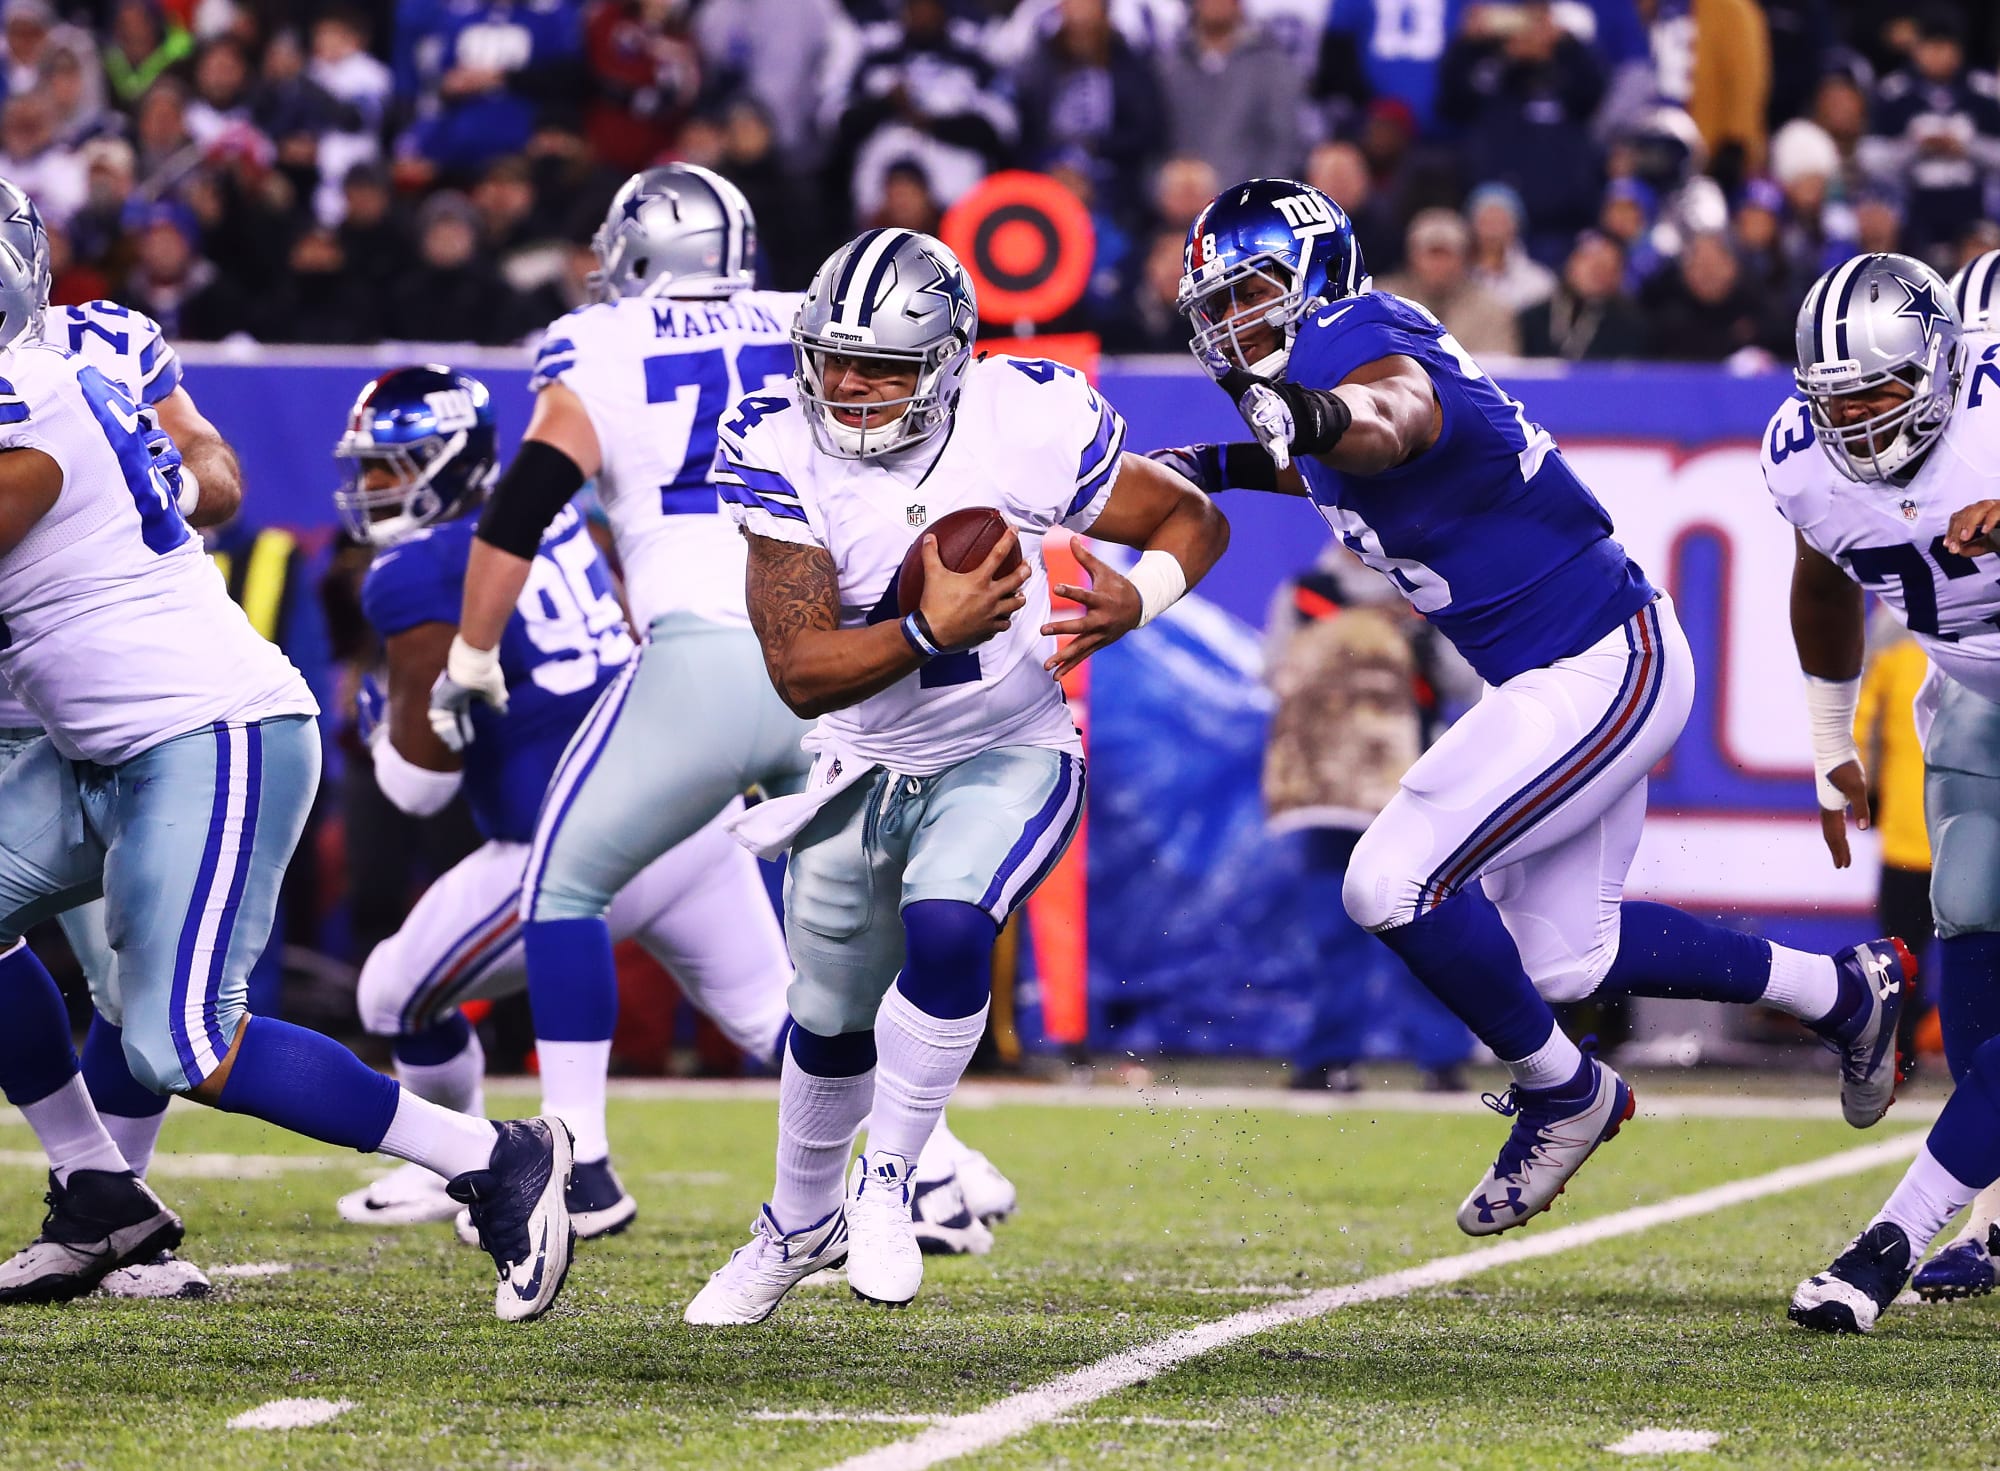 Giants vs. Cowboys Preview, score prediction and more